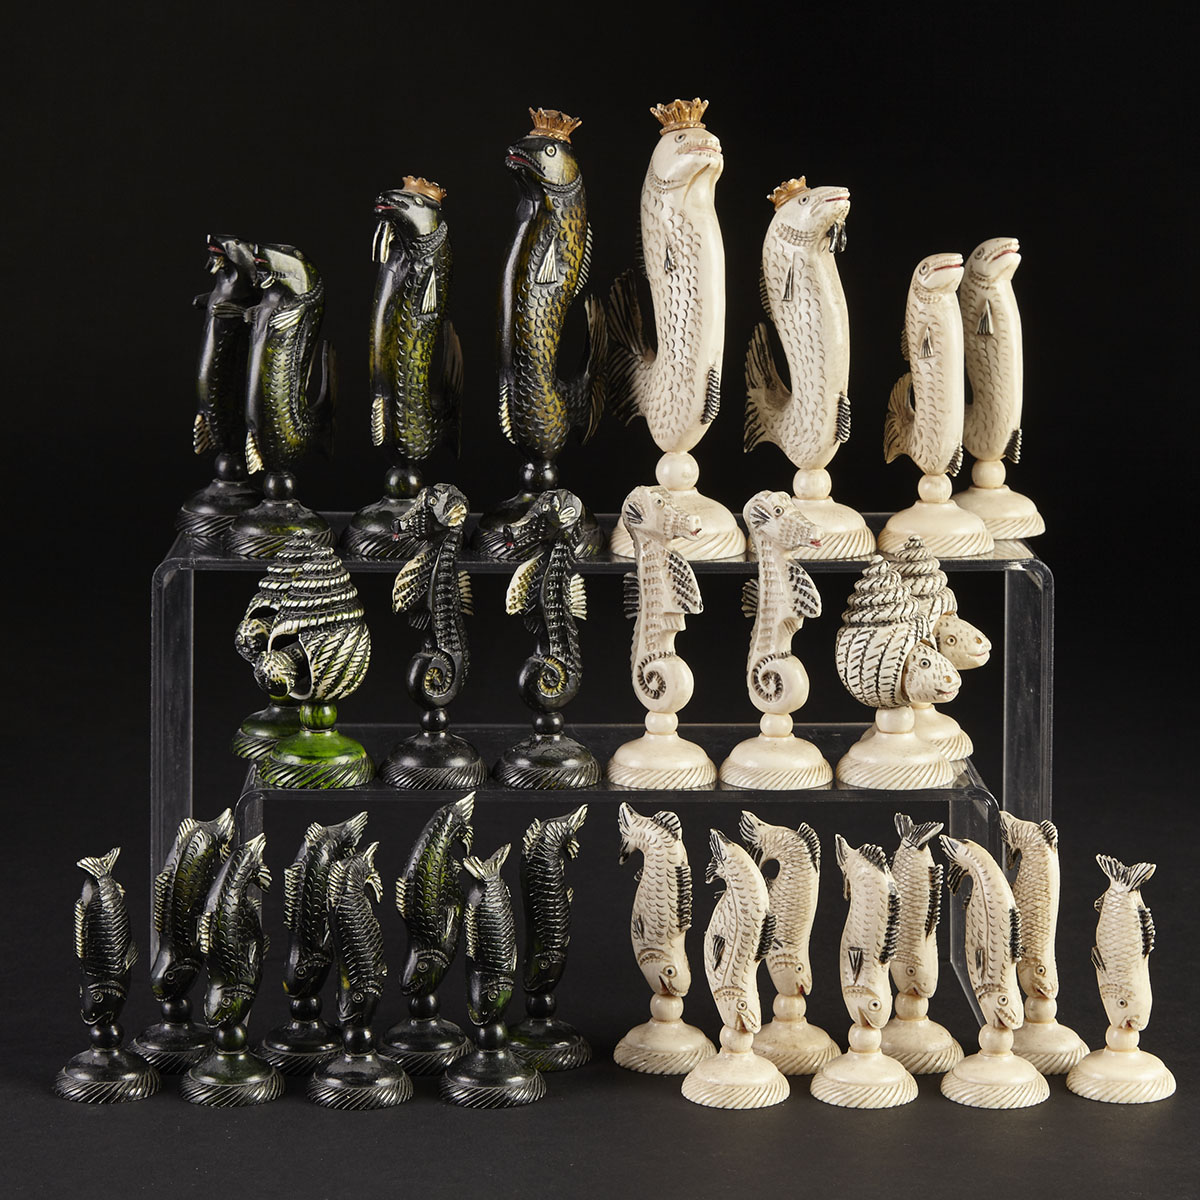 Portuguese Turned and Carved Ivory ‘Marine Life’ Chess Set, early-mid 20th century